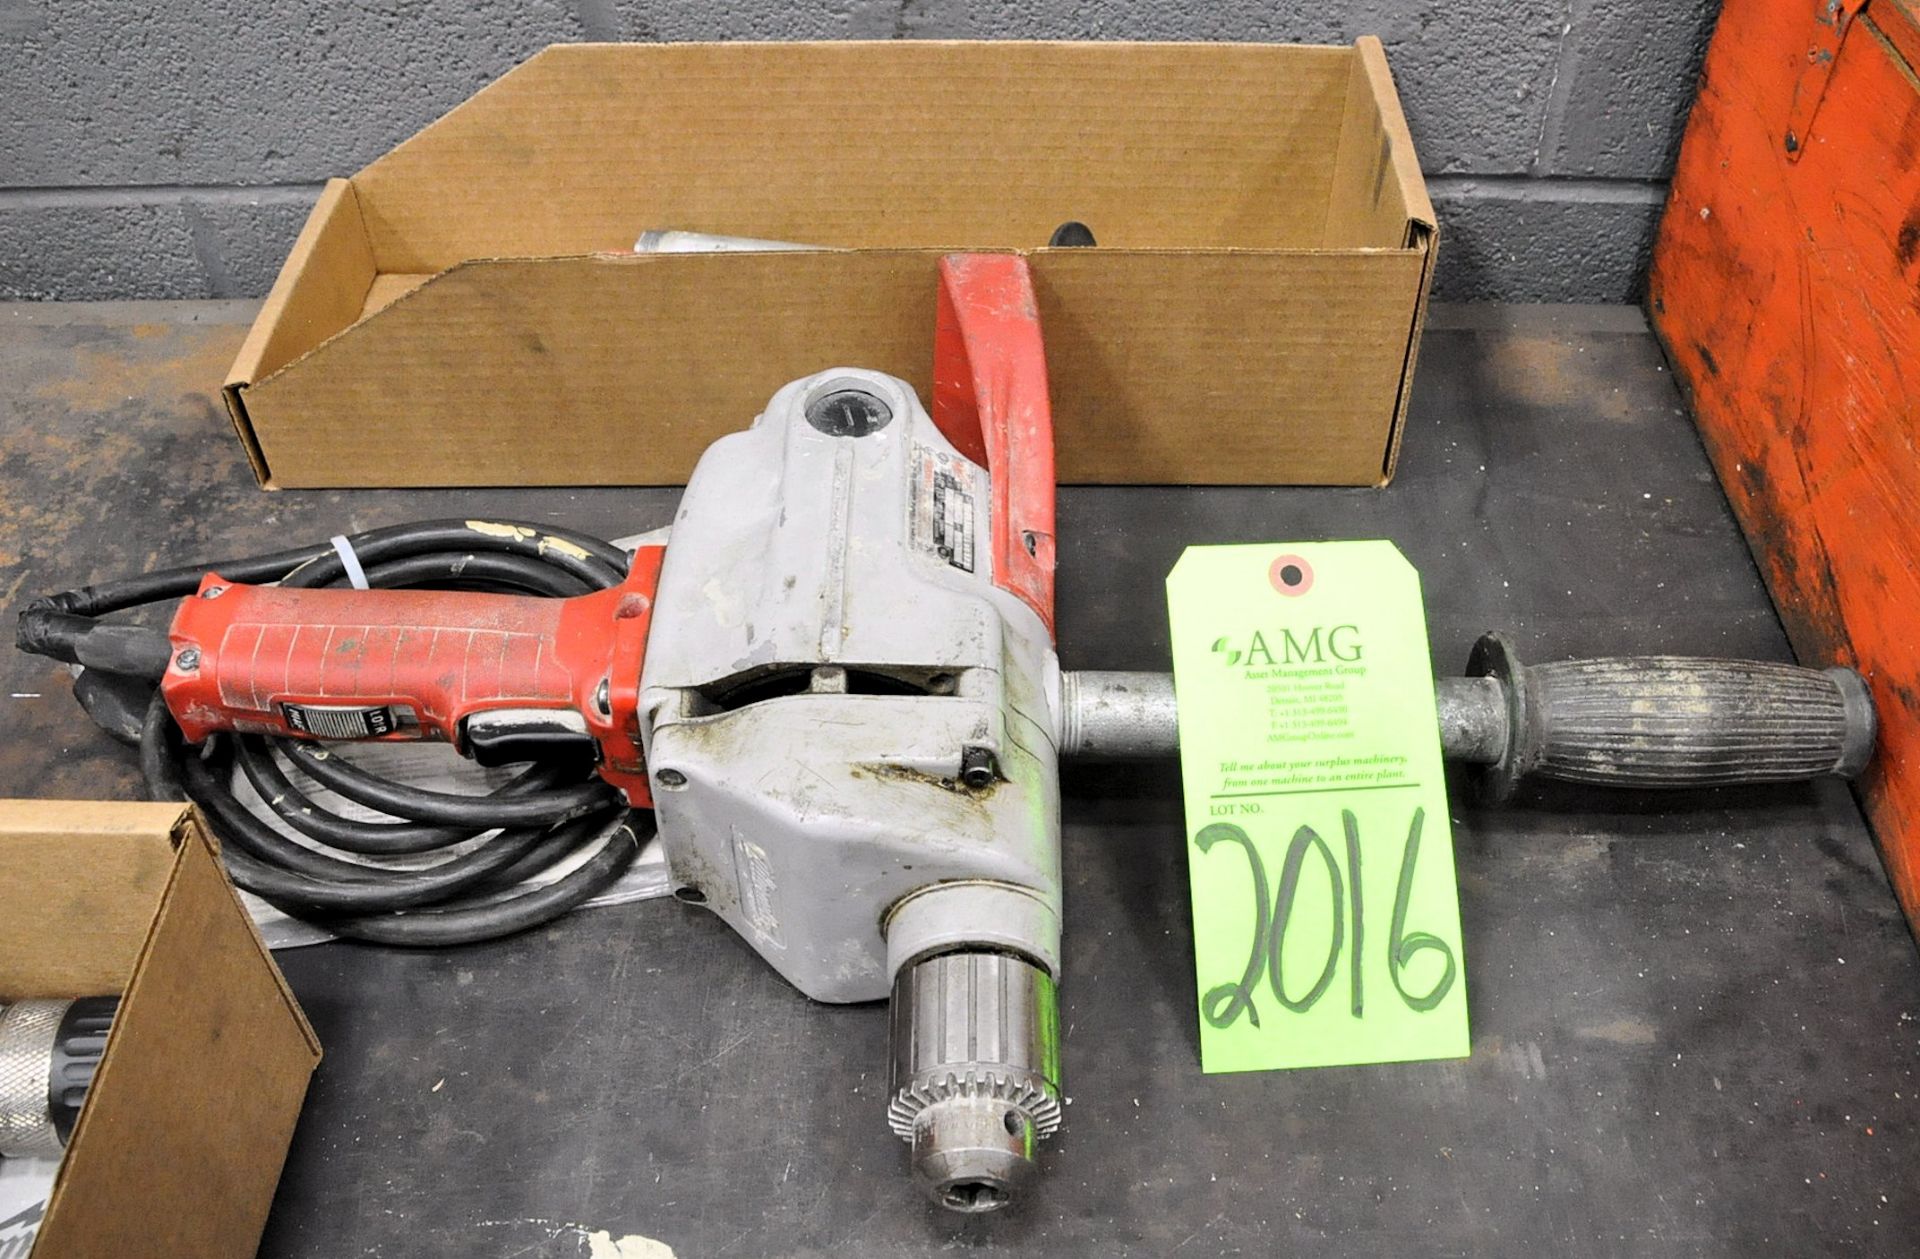 Milwaukee 1/2" Electric Drill with Handles in (1) Box, (G-19), (Green Tag)